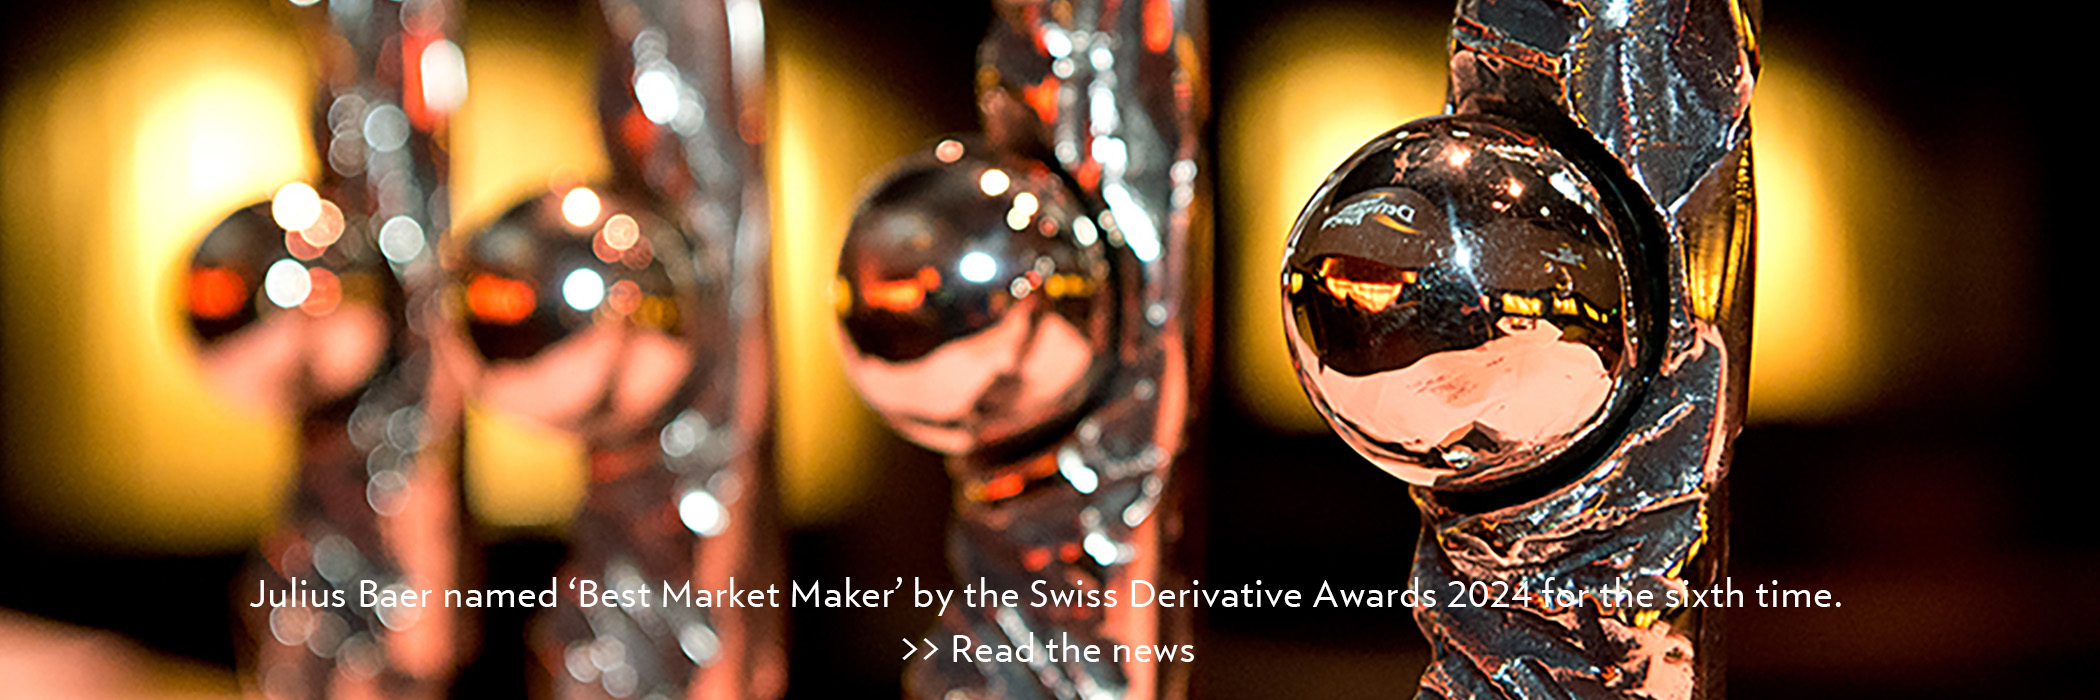 Julius Baer named ‘Best Market Maker’ by the Swiss Derivative Awards 2024 for the sixth time.